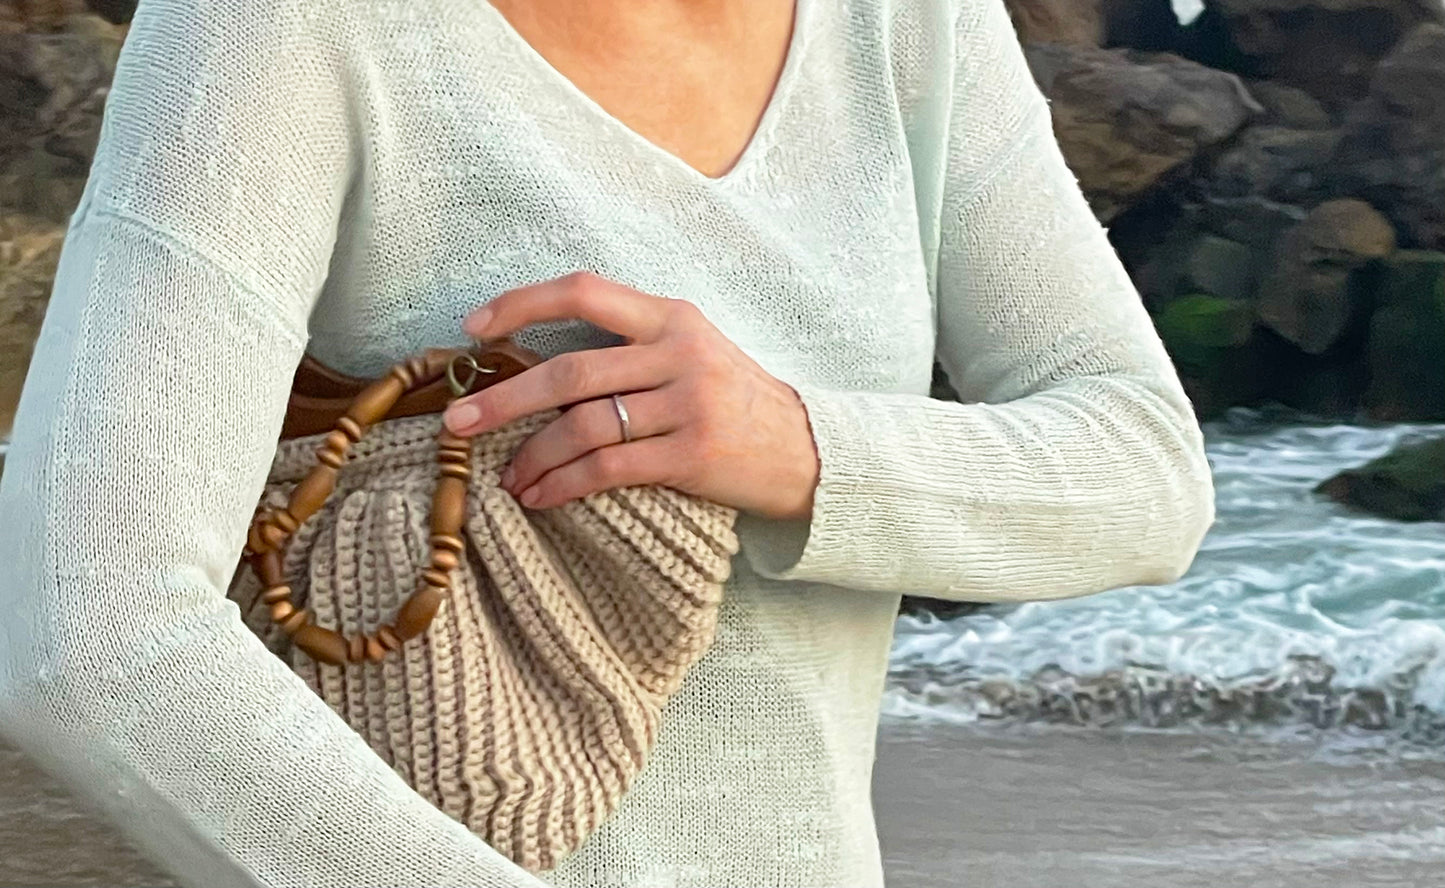 Malibu lifestyle best describes this Boho chic, hand crocheted bag. One-of-a-kind, reflecting Malibu's beautiful sandy beaches with up cycled, cotton blend yarn and wood beaded handles that are removable to create a clutch style. Bag Dimensions: 12"wide x 9"high (Handles: 5"wide x 5"high) Color: Sand Consciously crafted in California